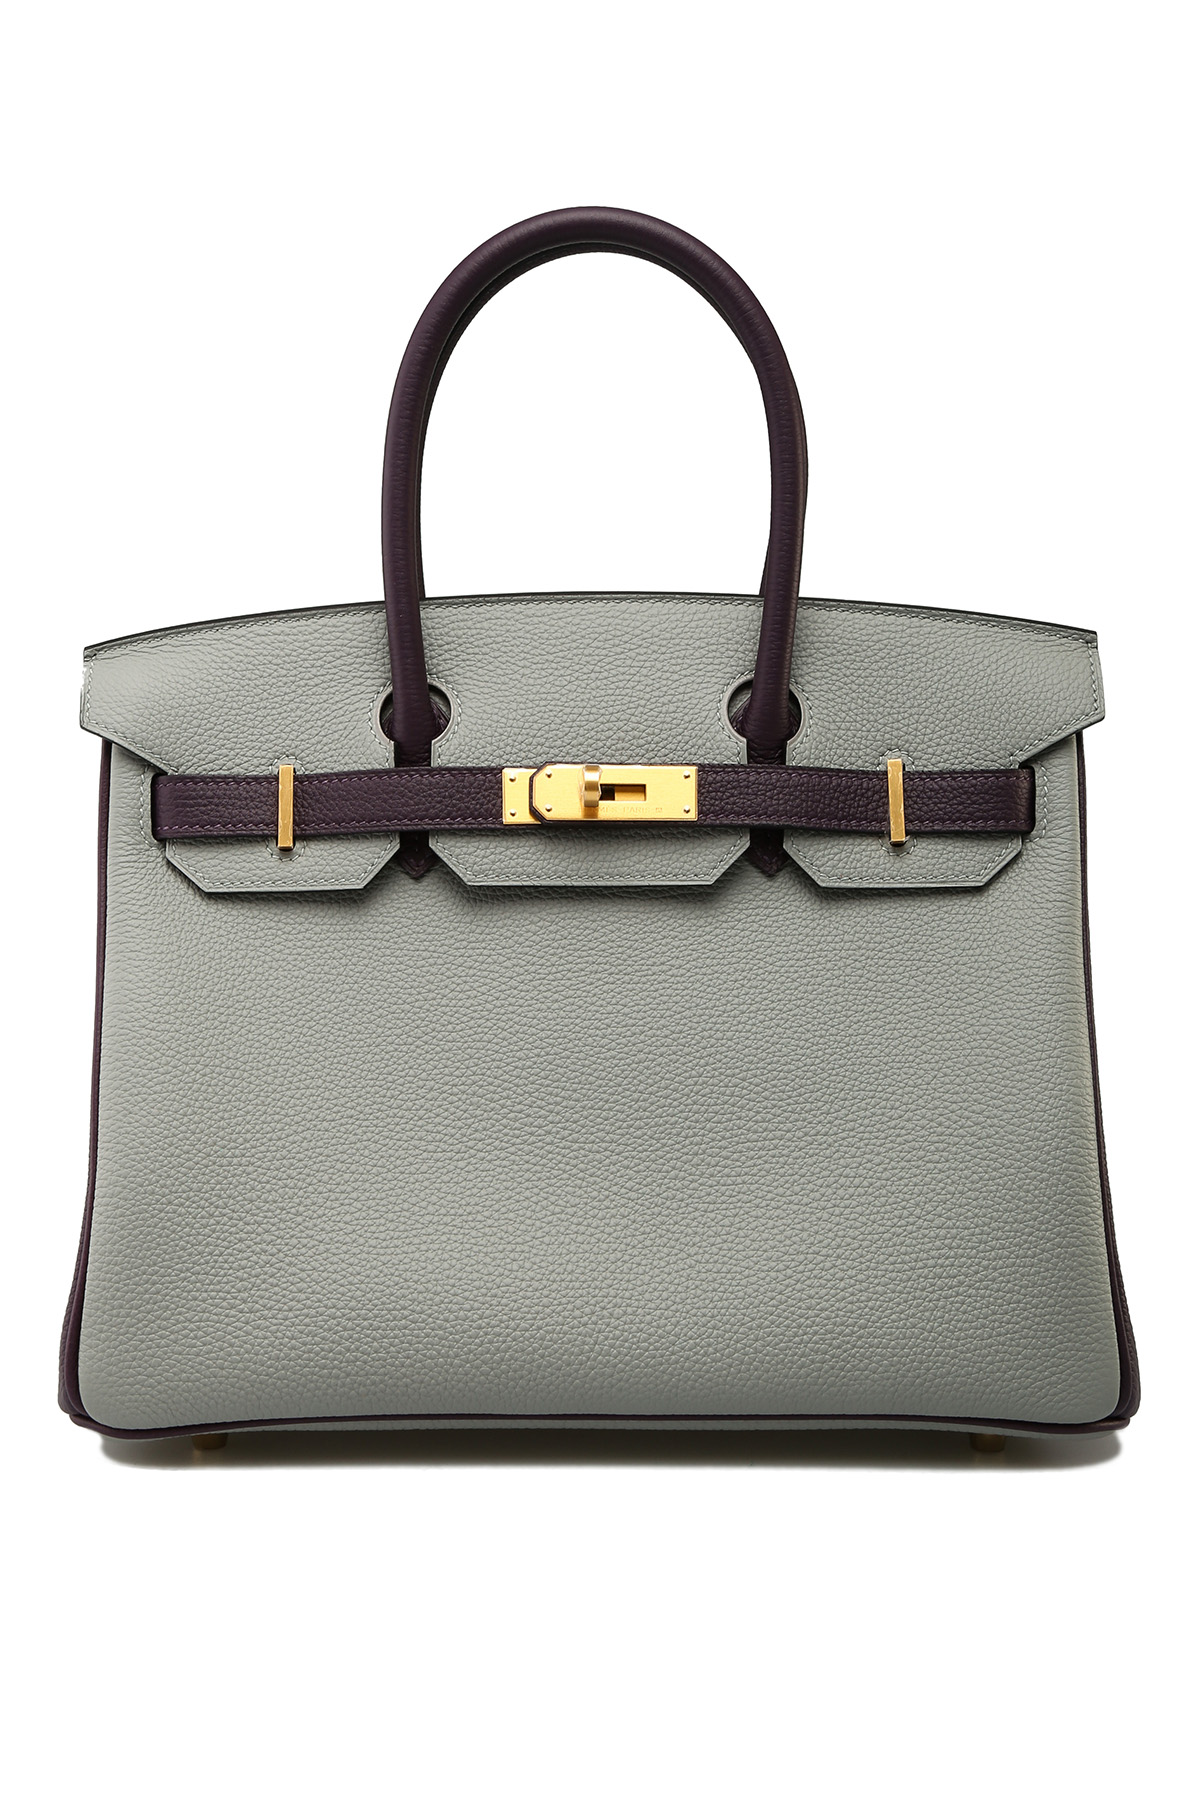 Hermès Gris Mouette Togo Birkin 30 Gold Hardware, 2016 Available For  Immediate Sale At Sotheby's